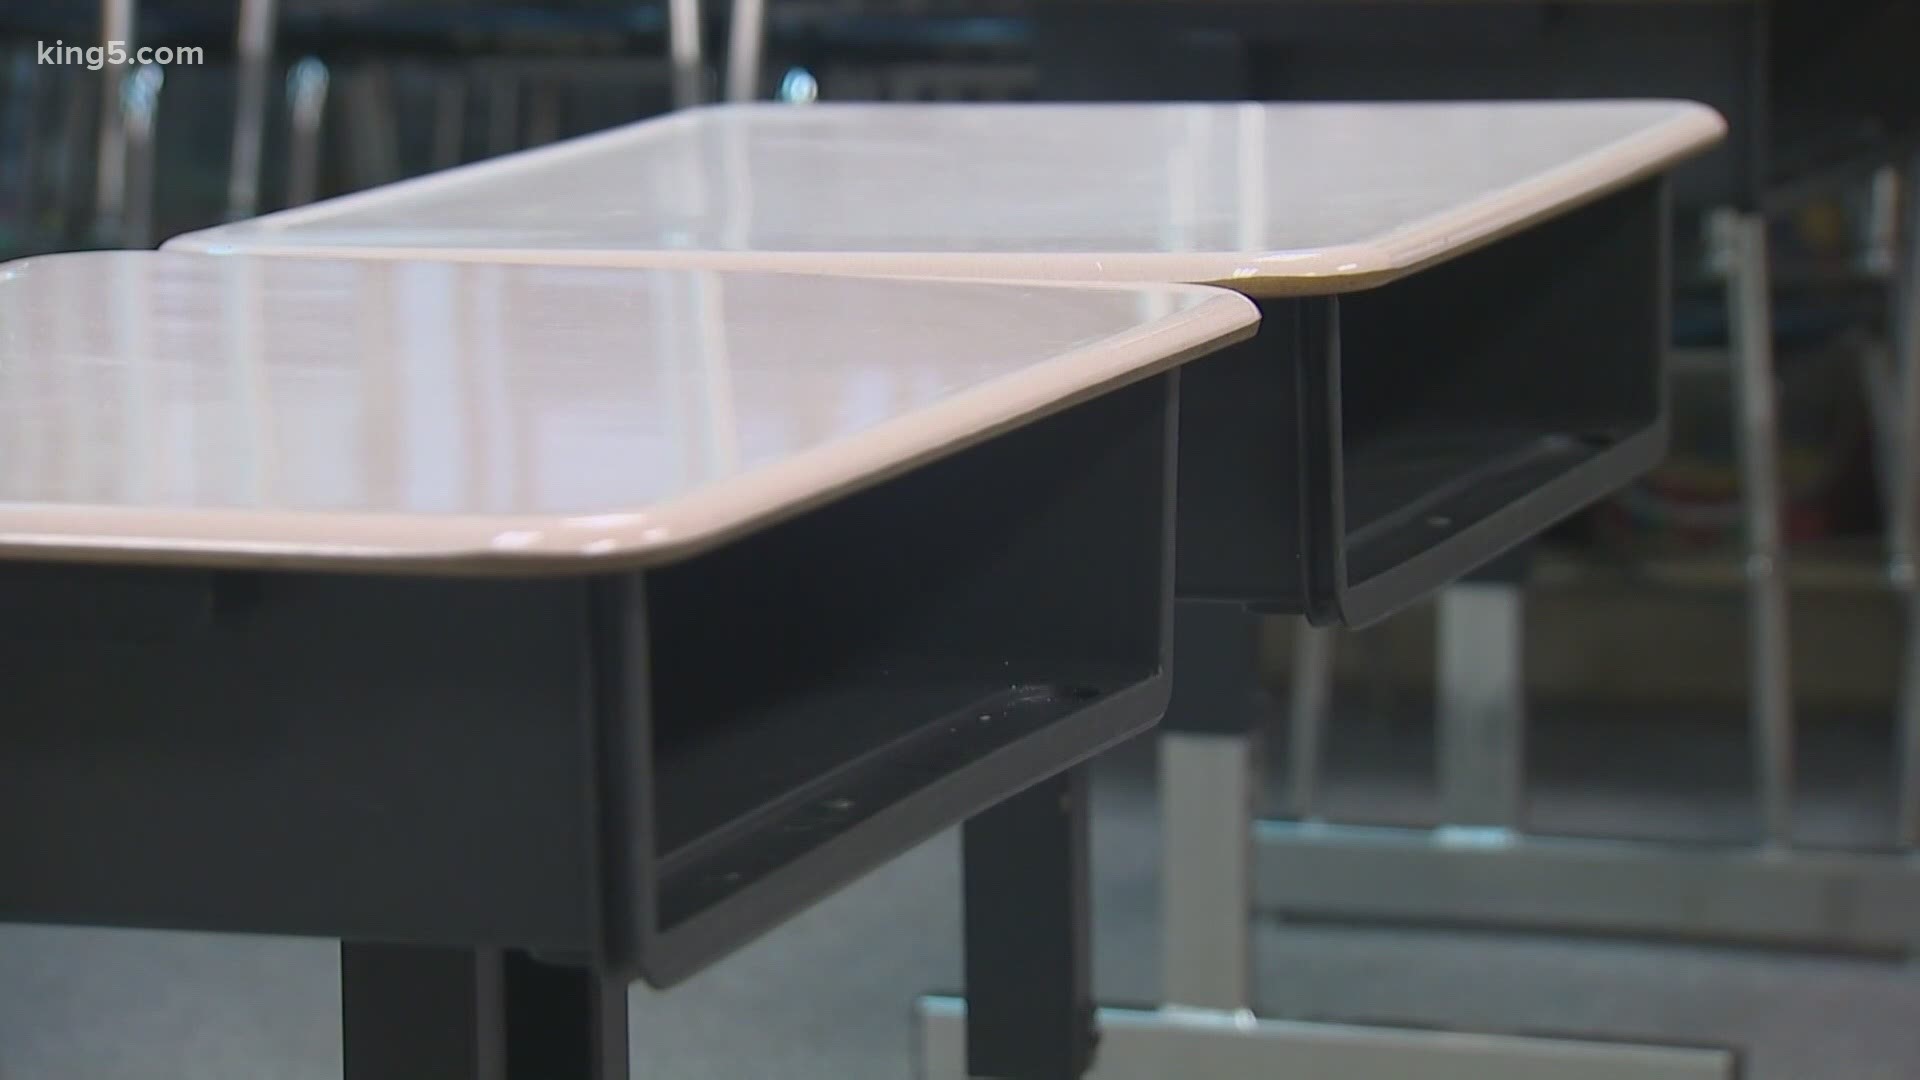 Some teachers in the Tacoma school district say they don't feel comfortable moving forward with in-class learning given the current safety protocols in place.